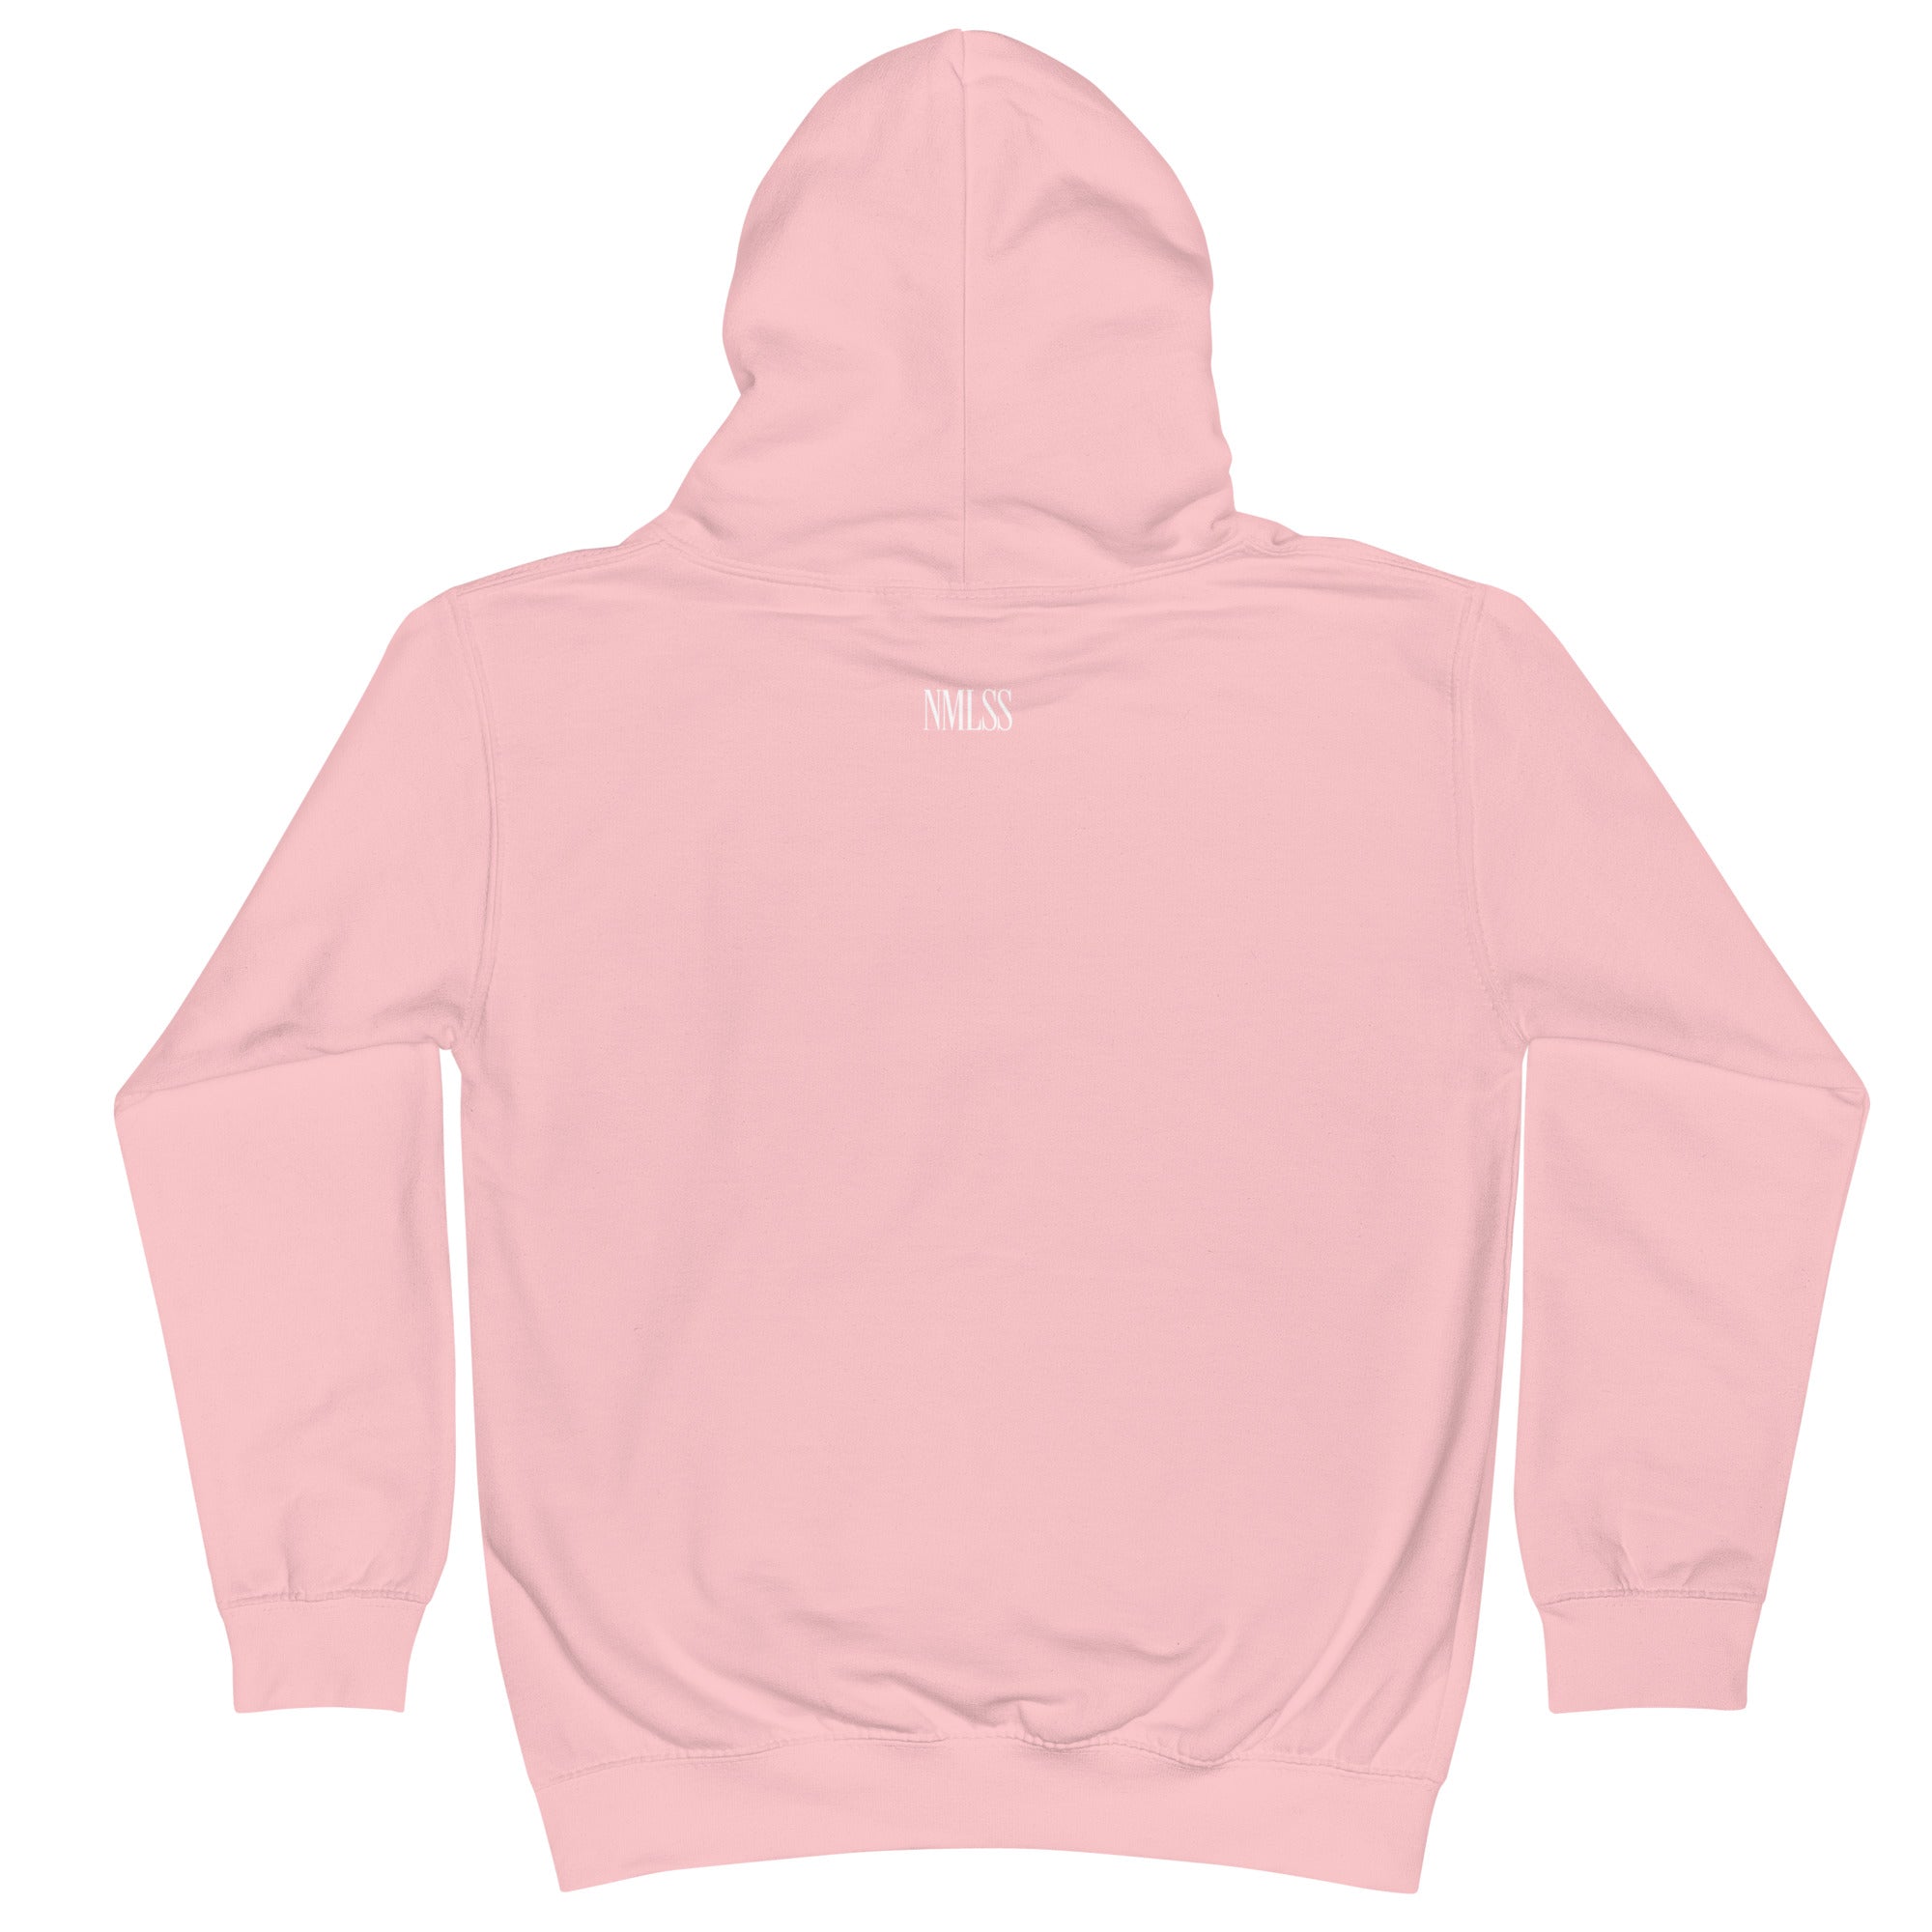 YOUTH NAMELESS HOODIE [PINK]